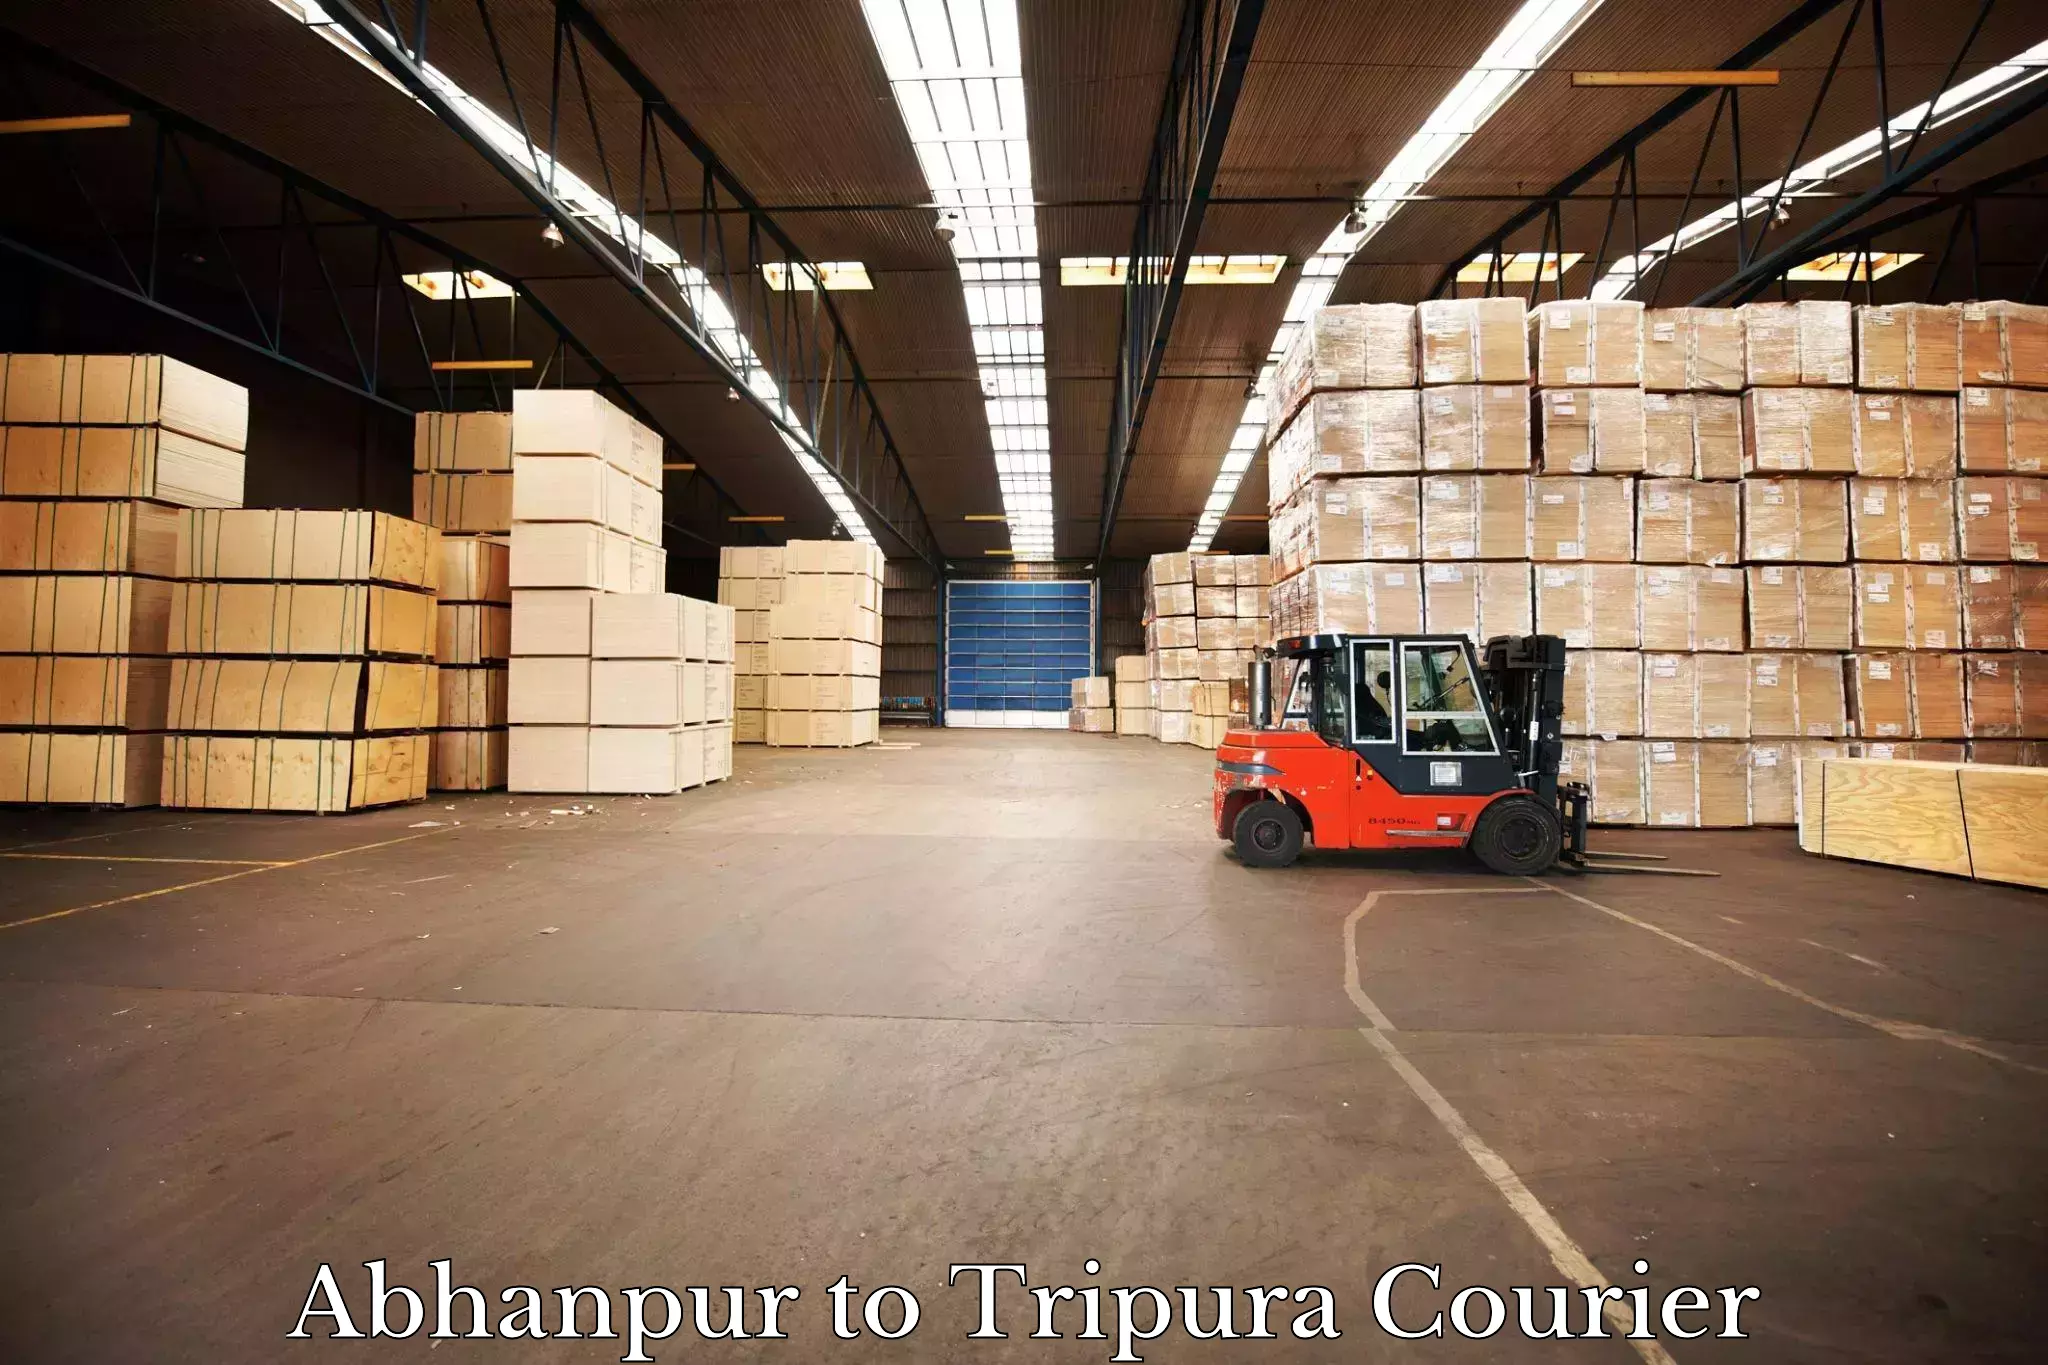 Enhanced delivery experience in Abhanpur to Udaipur Tripura